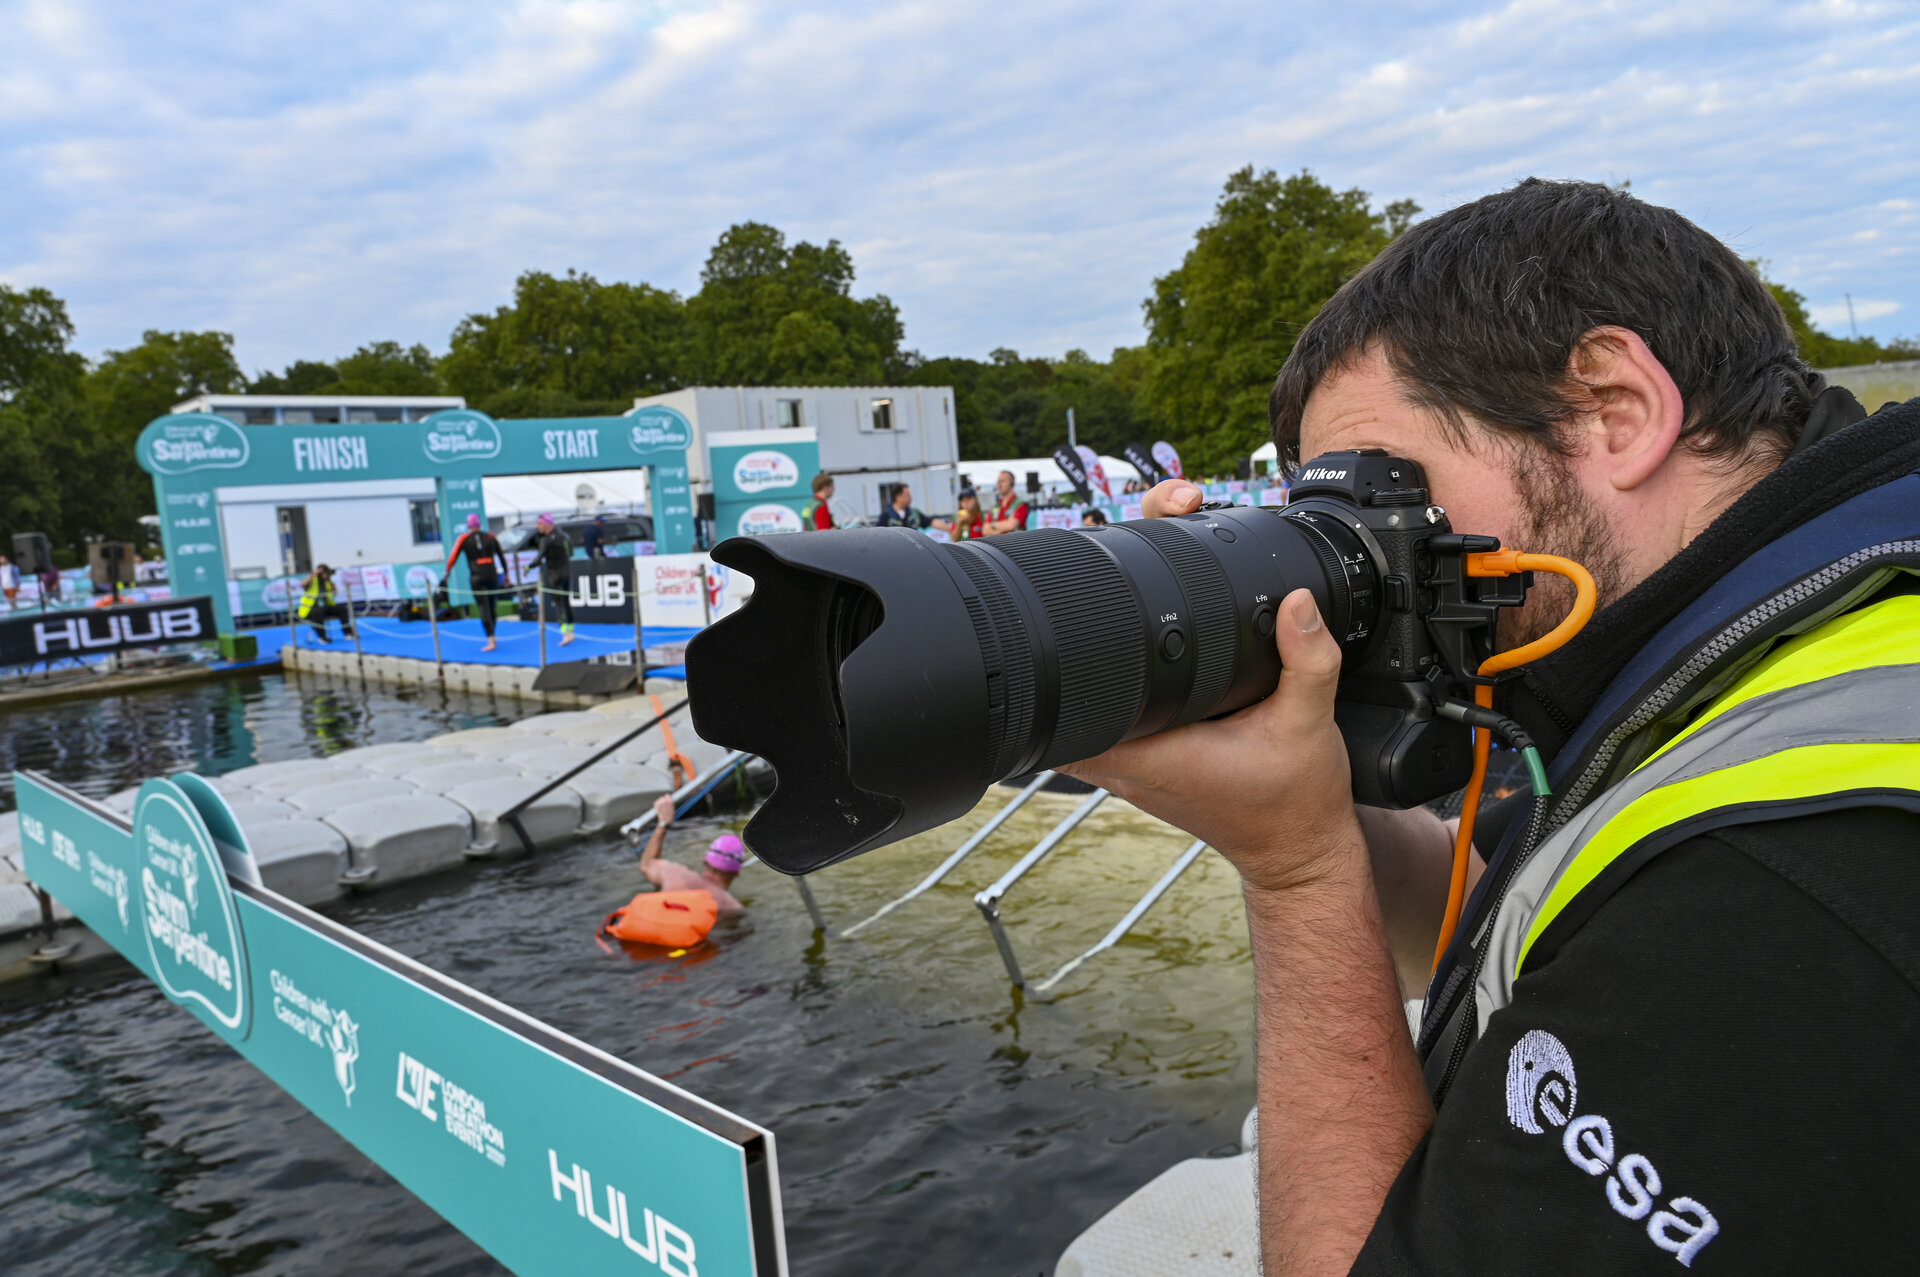 Official photographer at the Swim Serpentine event held on 18 September